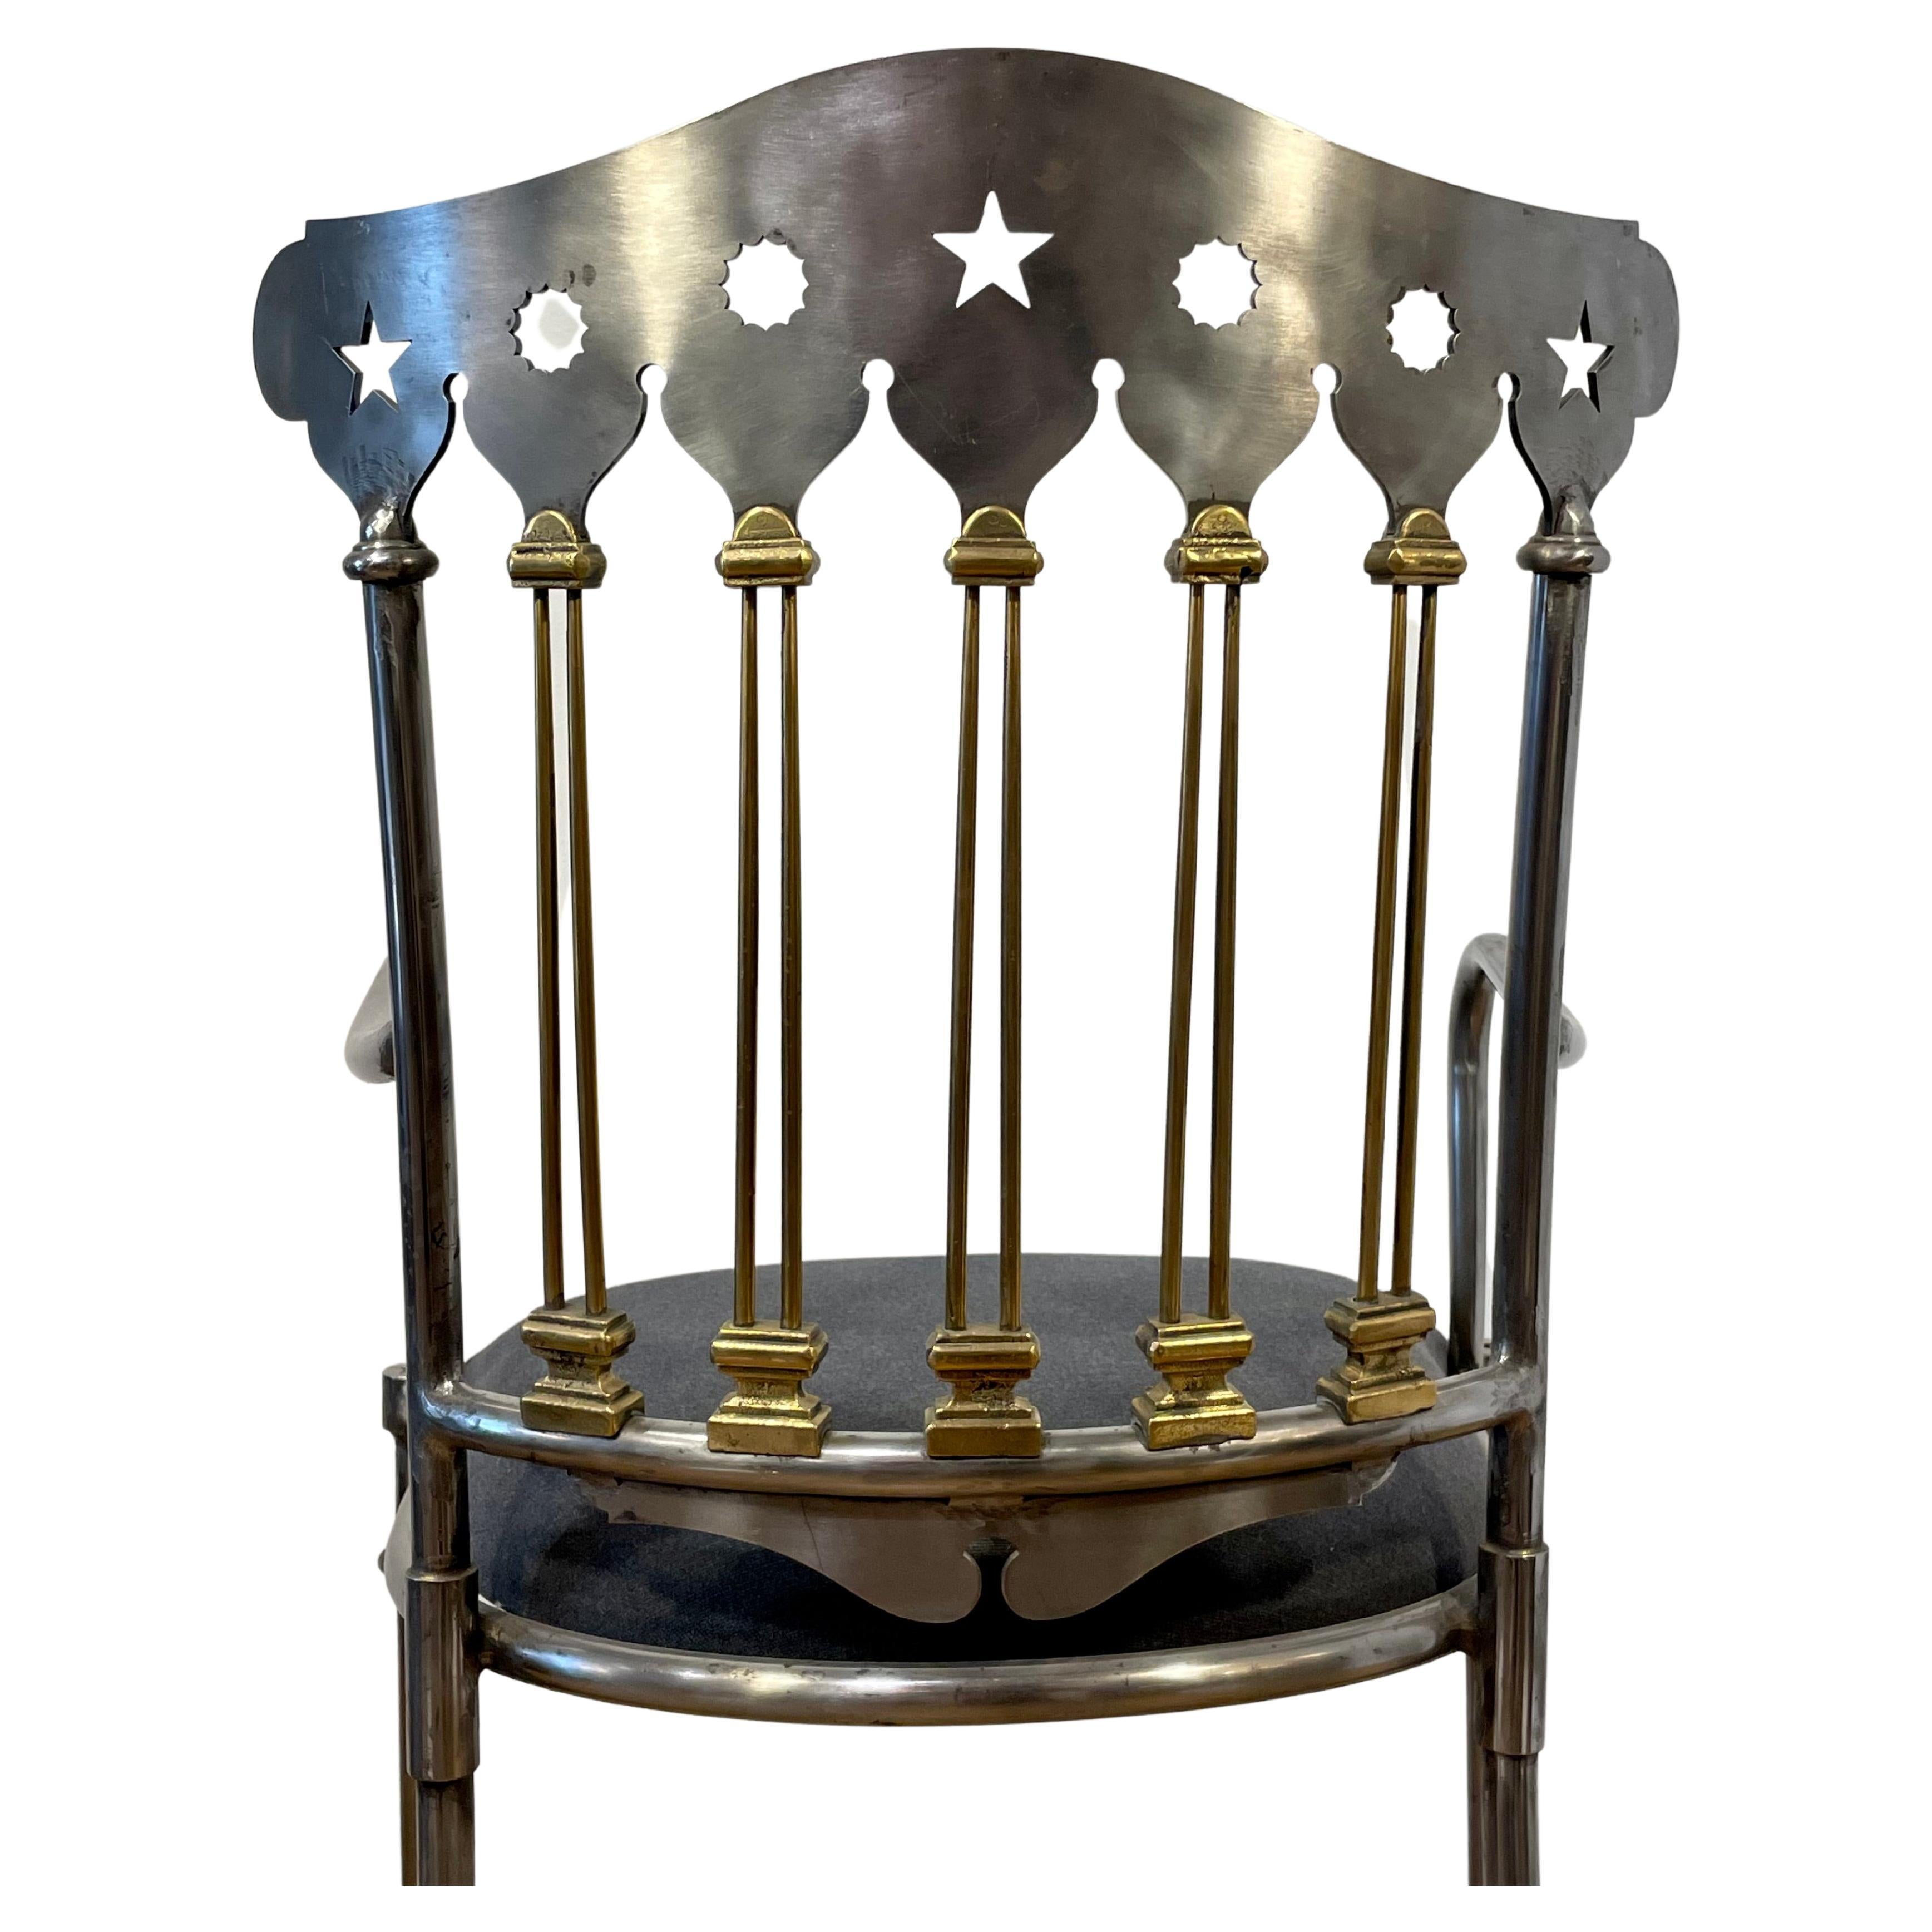 Hand-casted steel and brass dining chairs
Star motif seatback.


